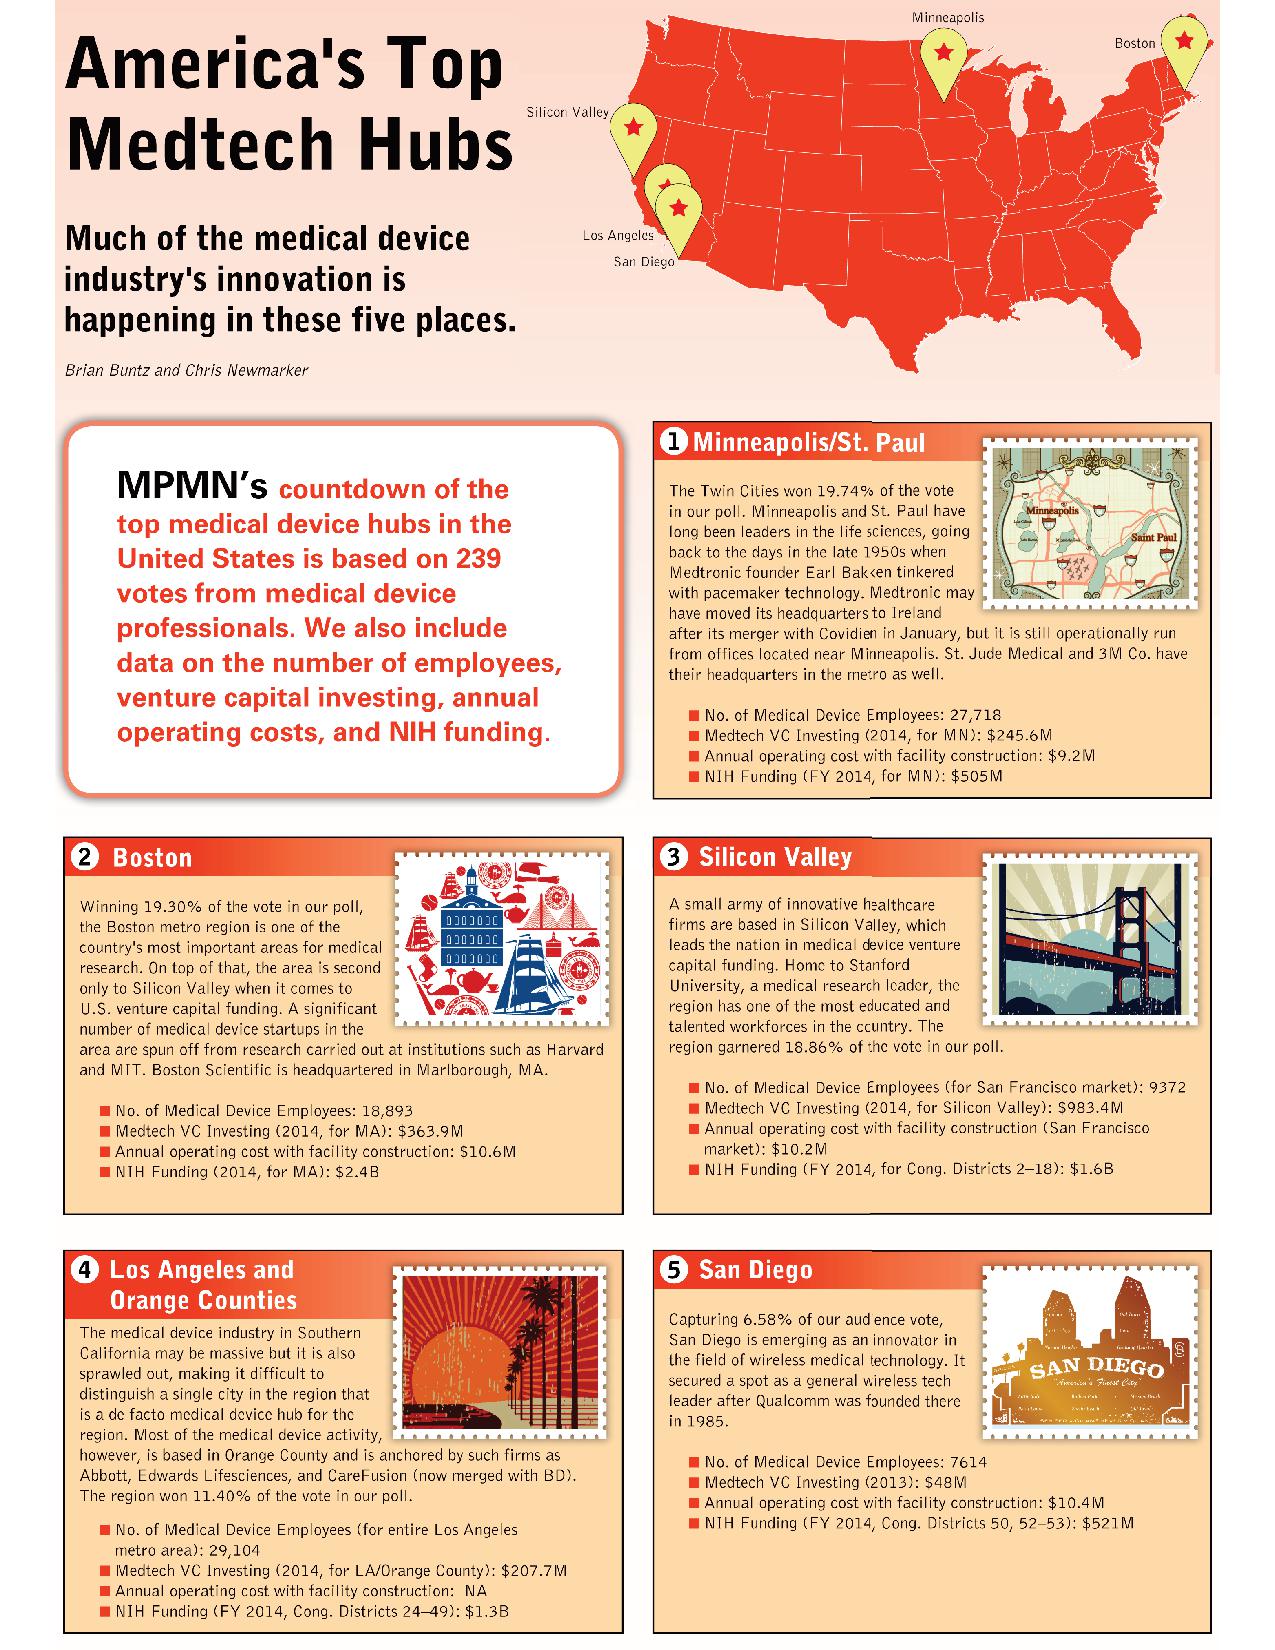 America's Greatest Medtech Hubs: What You Need to Know